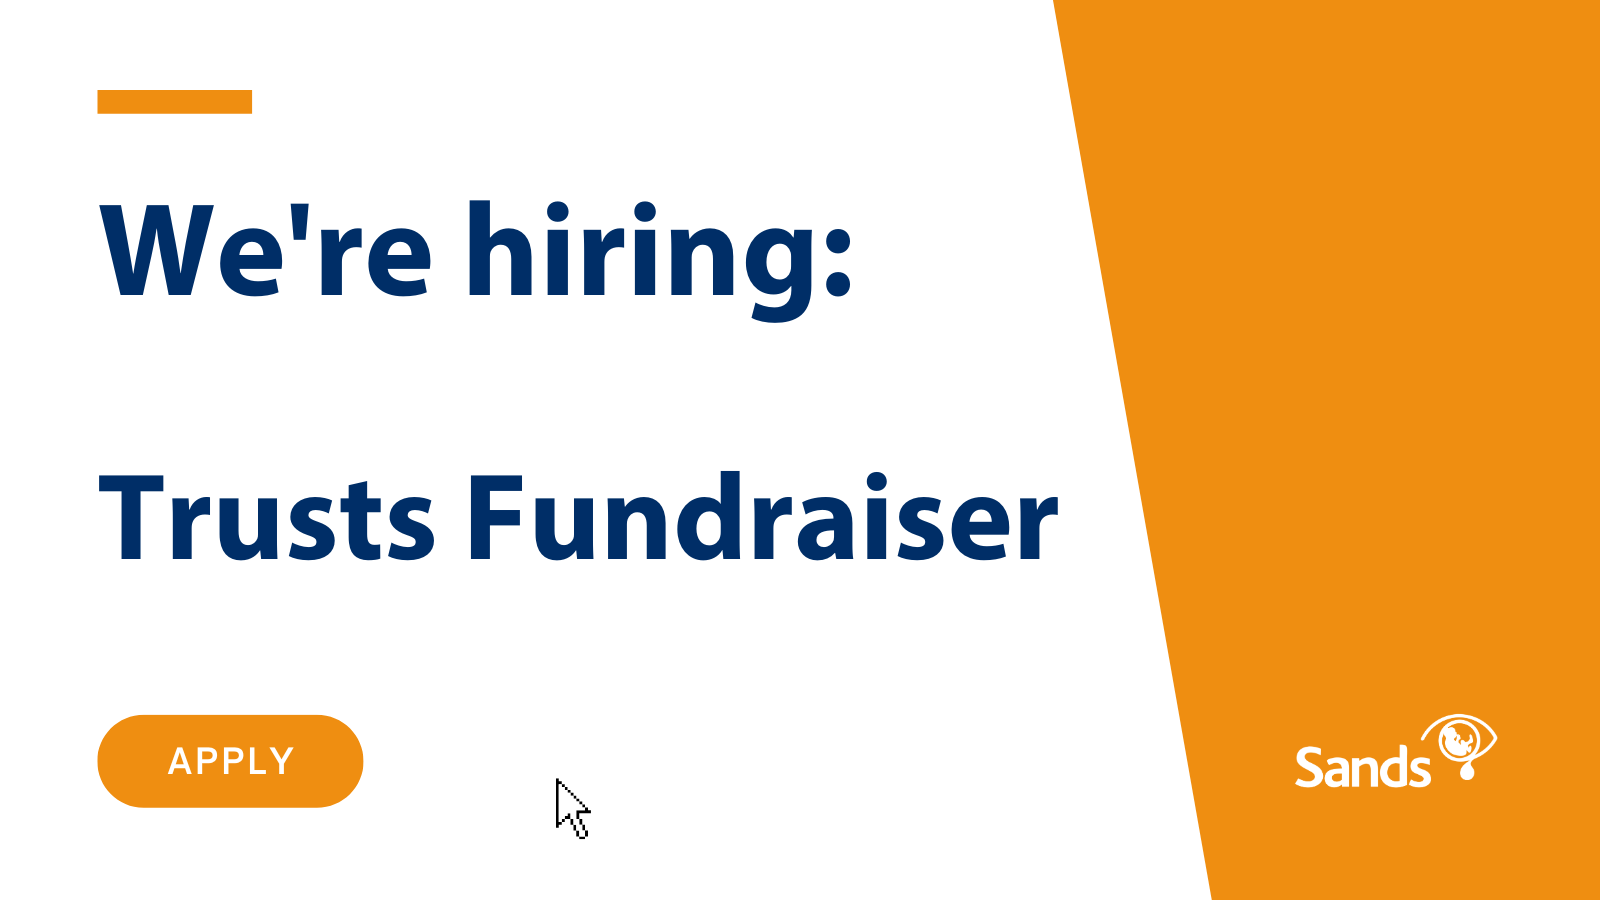 We are hiring Trusts Fundraiser